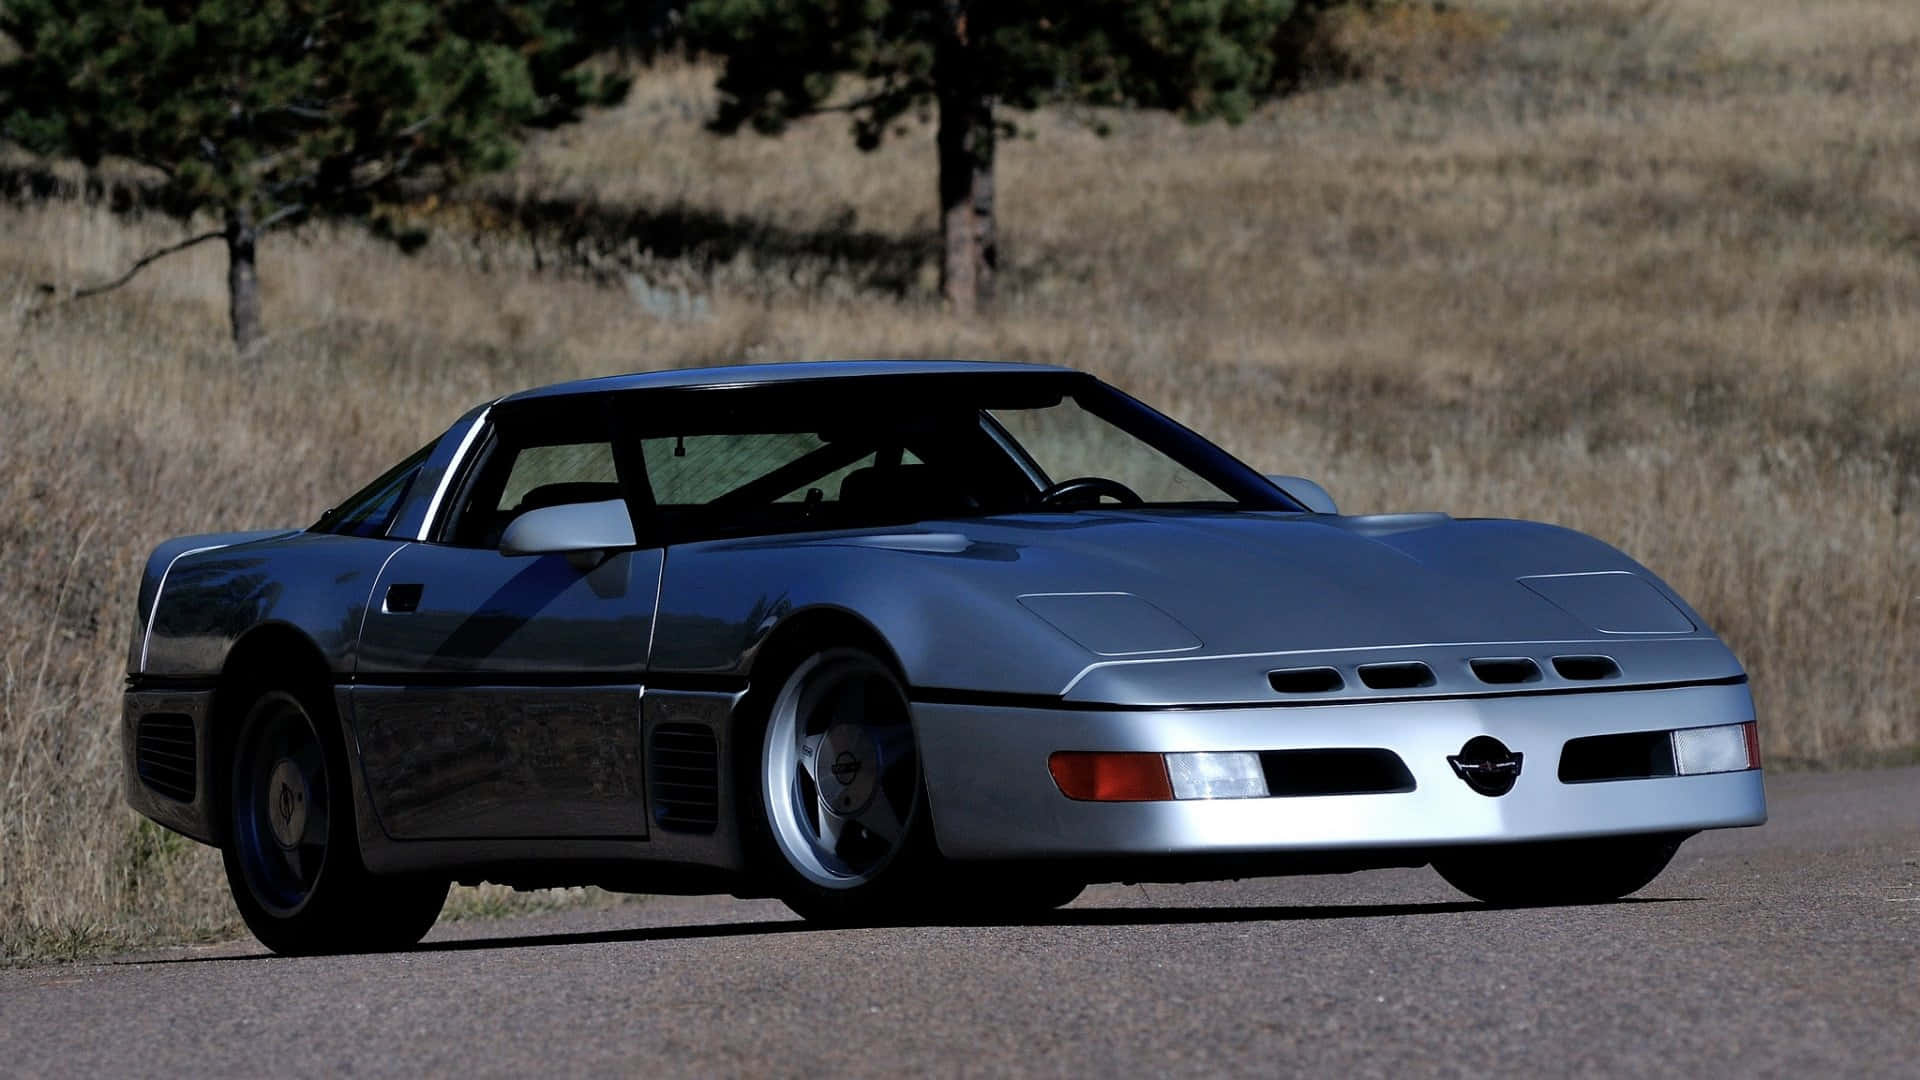 Experience unparalleled thrills in a classic C4 Corvette.